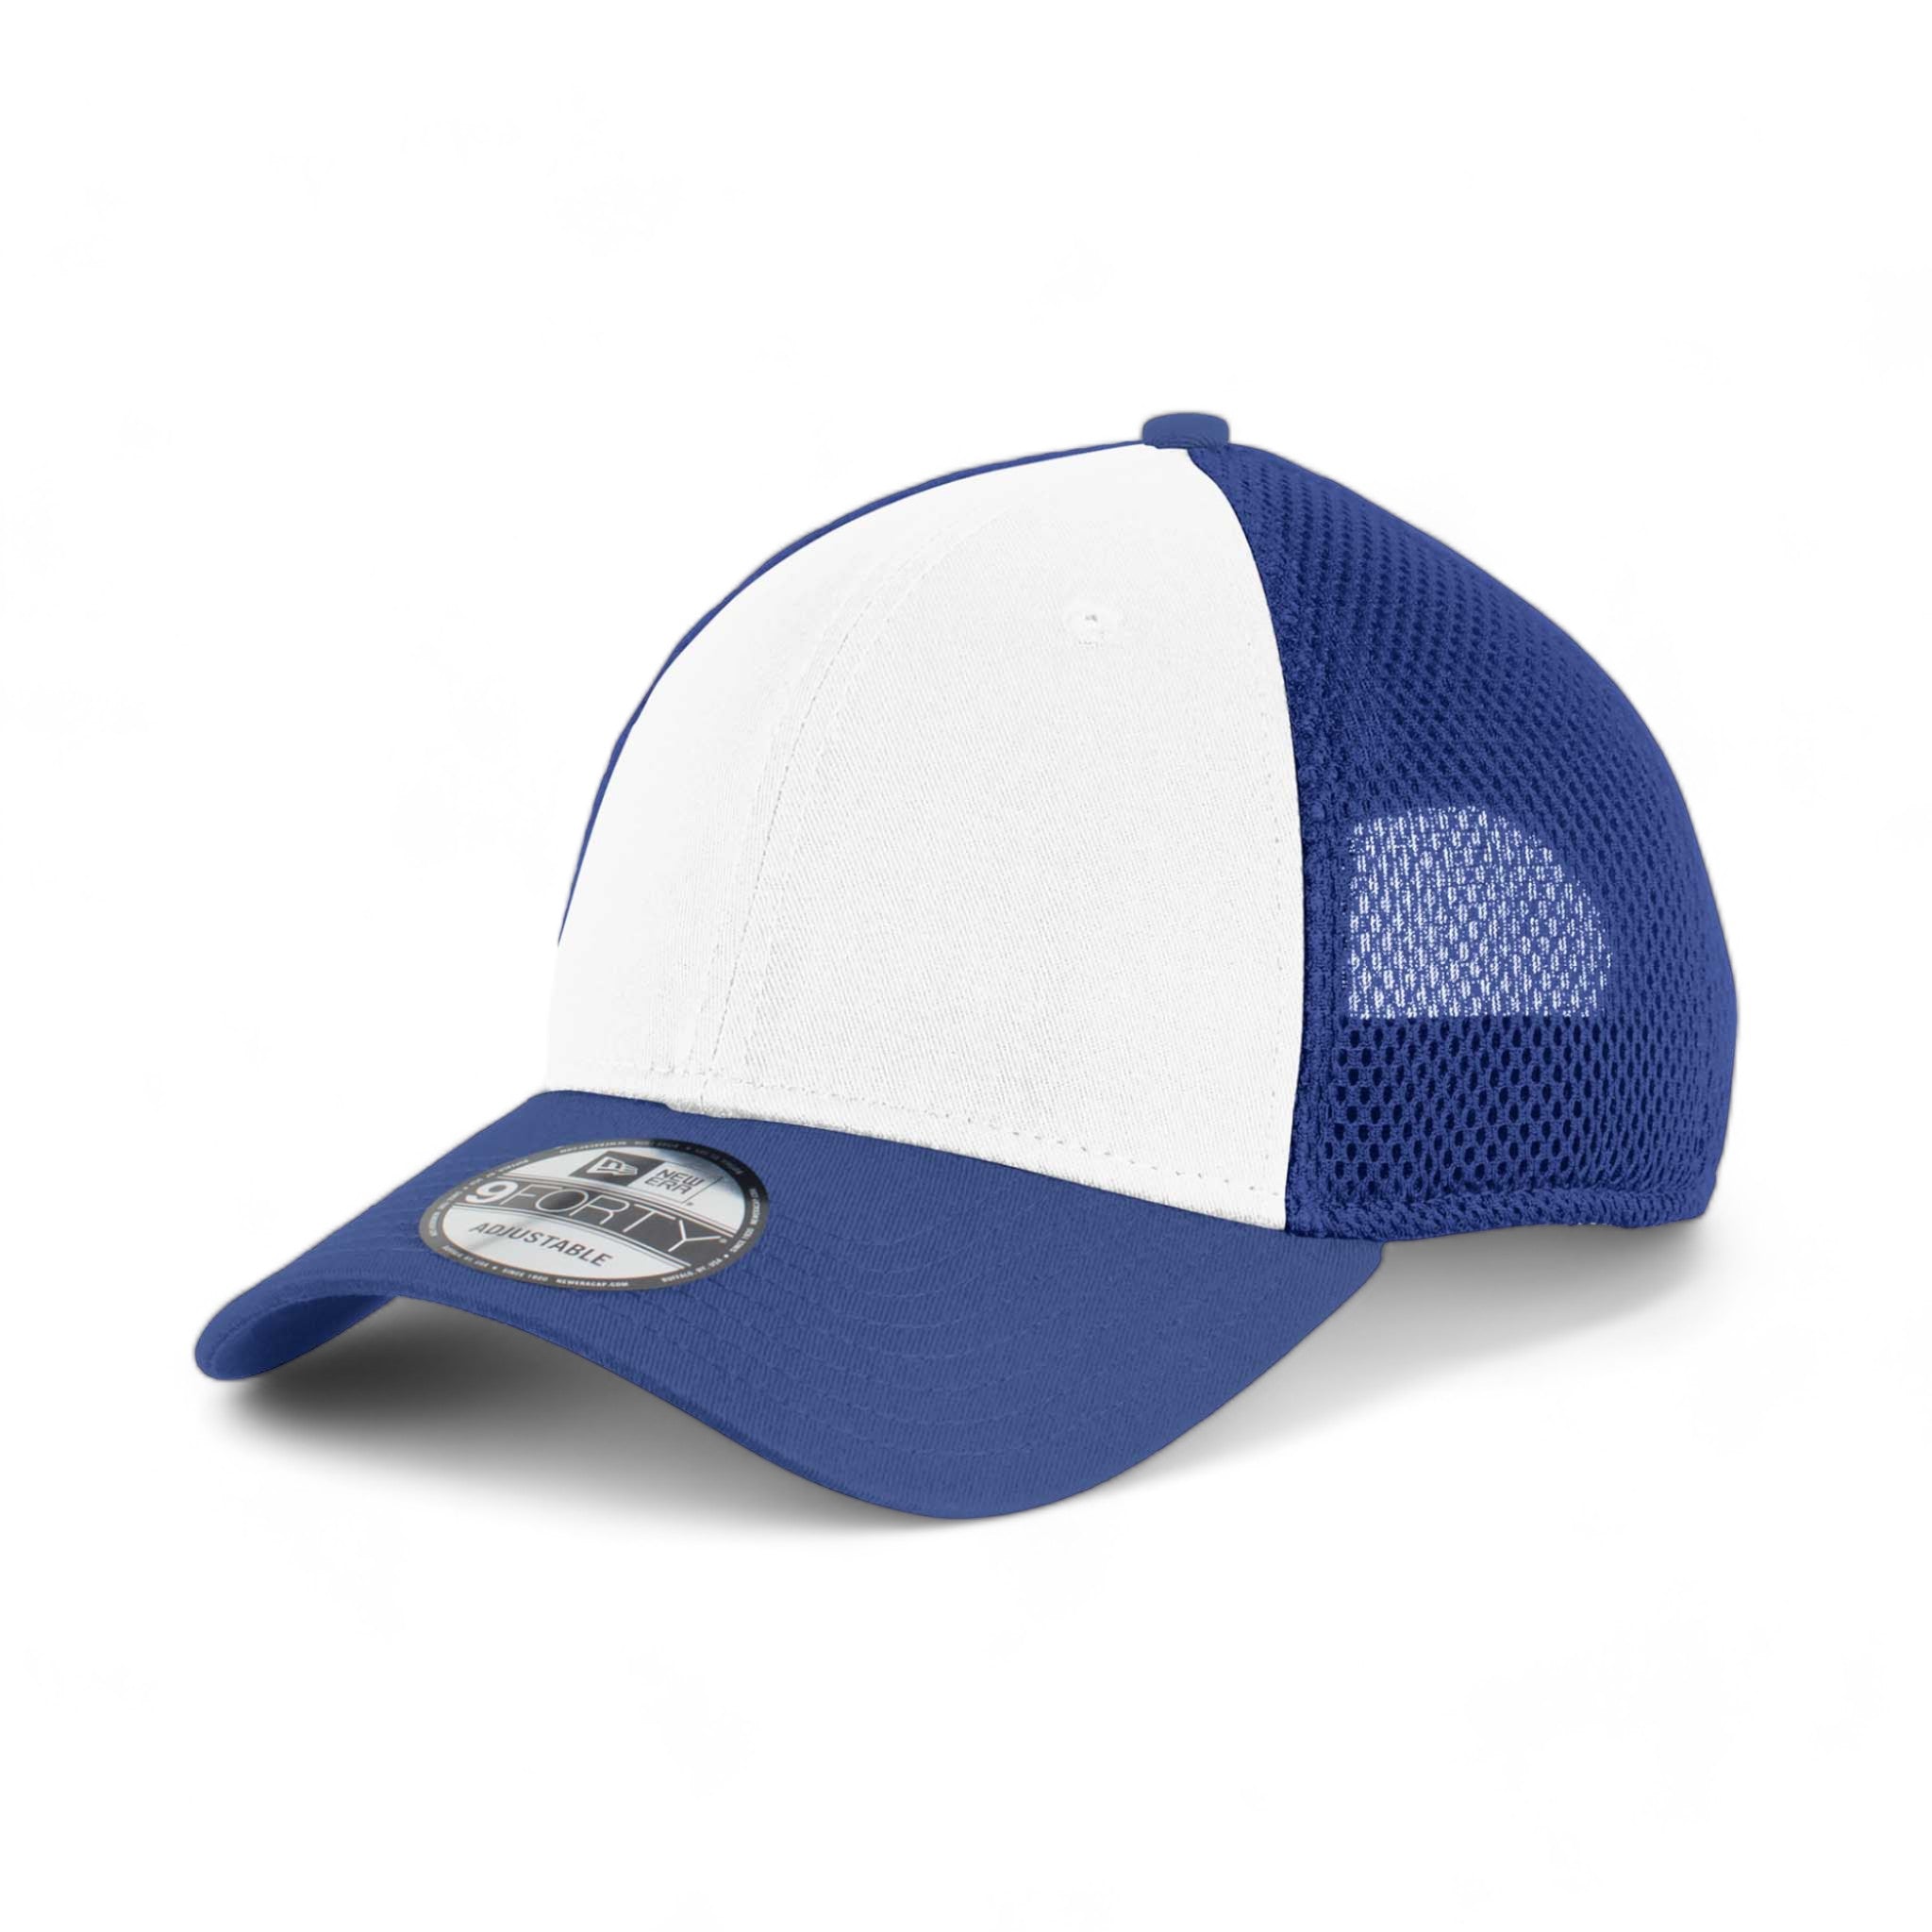 Side view of New Era NE204 custom hat in white and royal